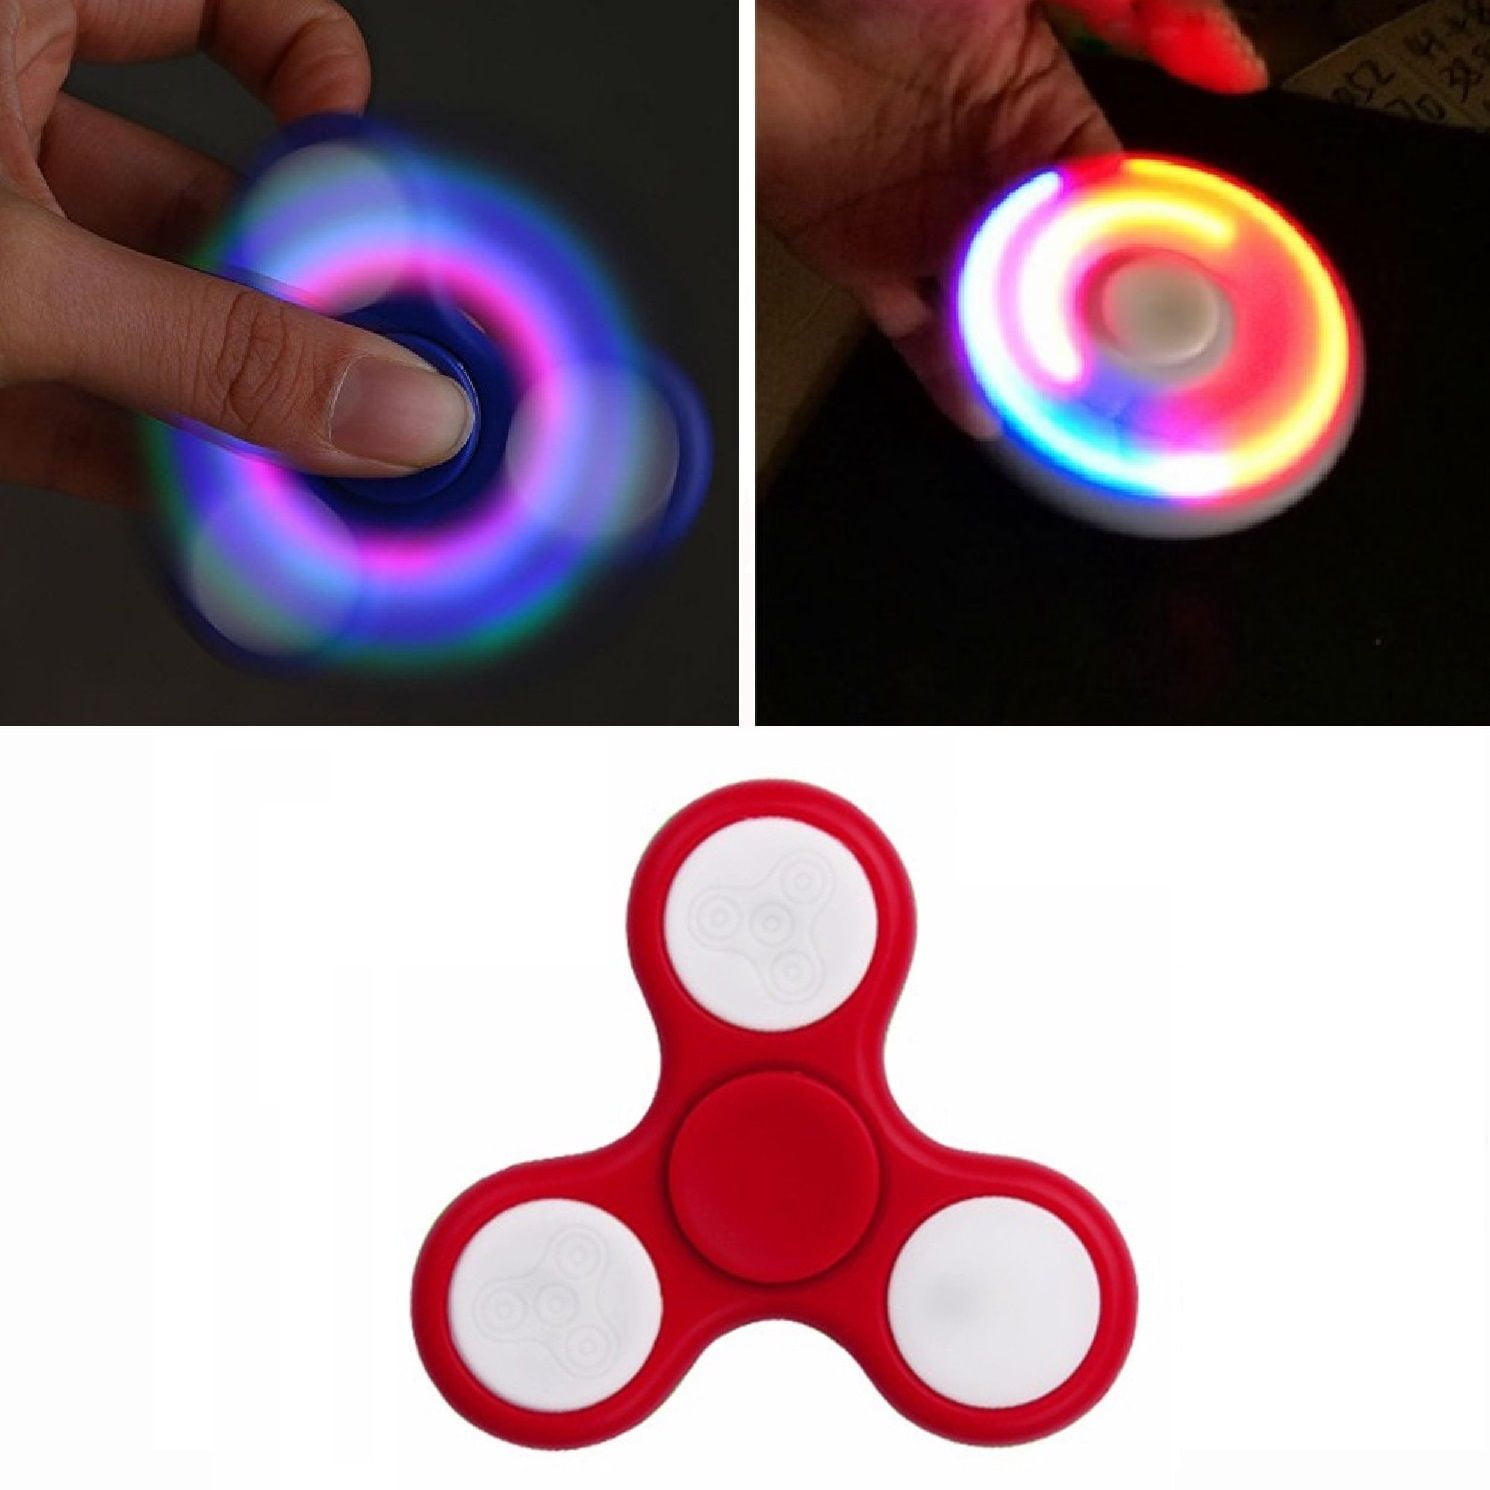 Spinners By IN Global Original Edition Tri-Color Fidget Spinner